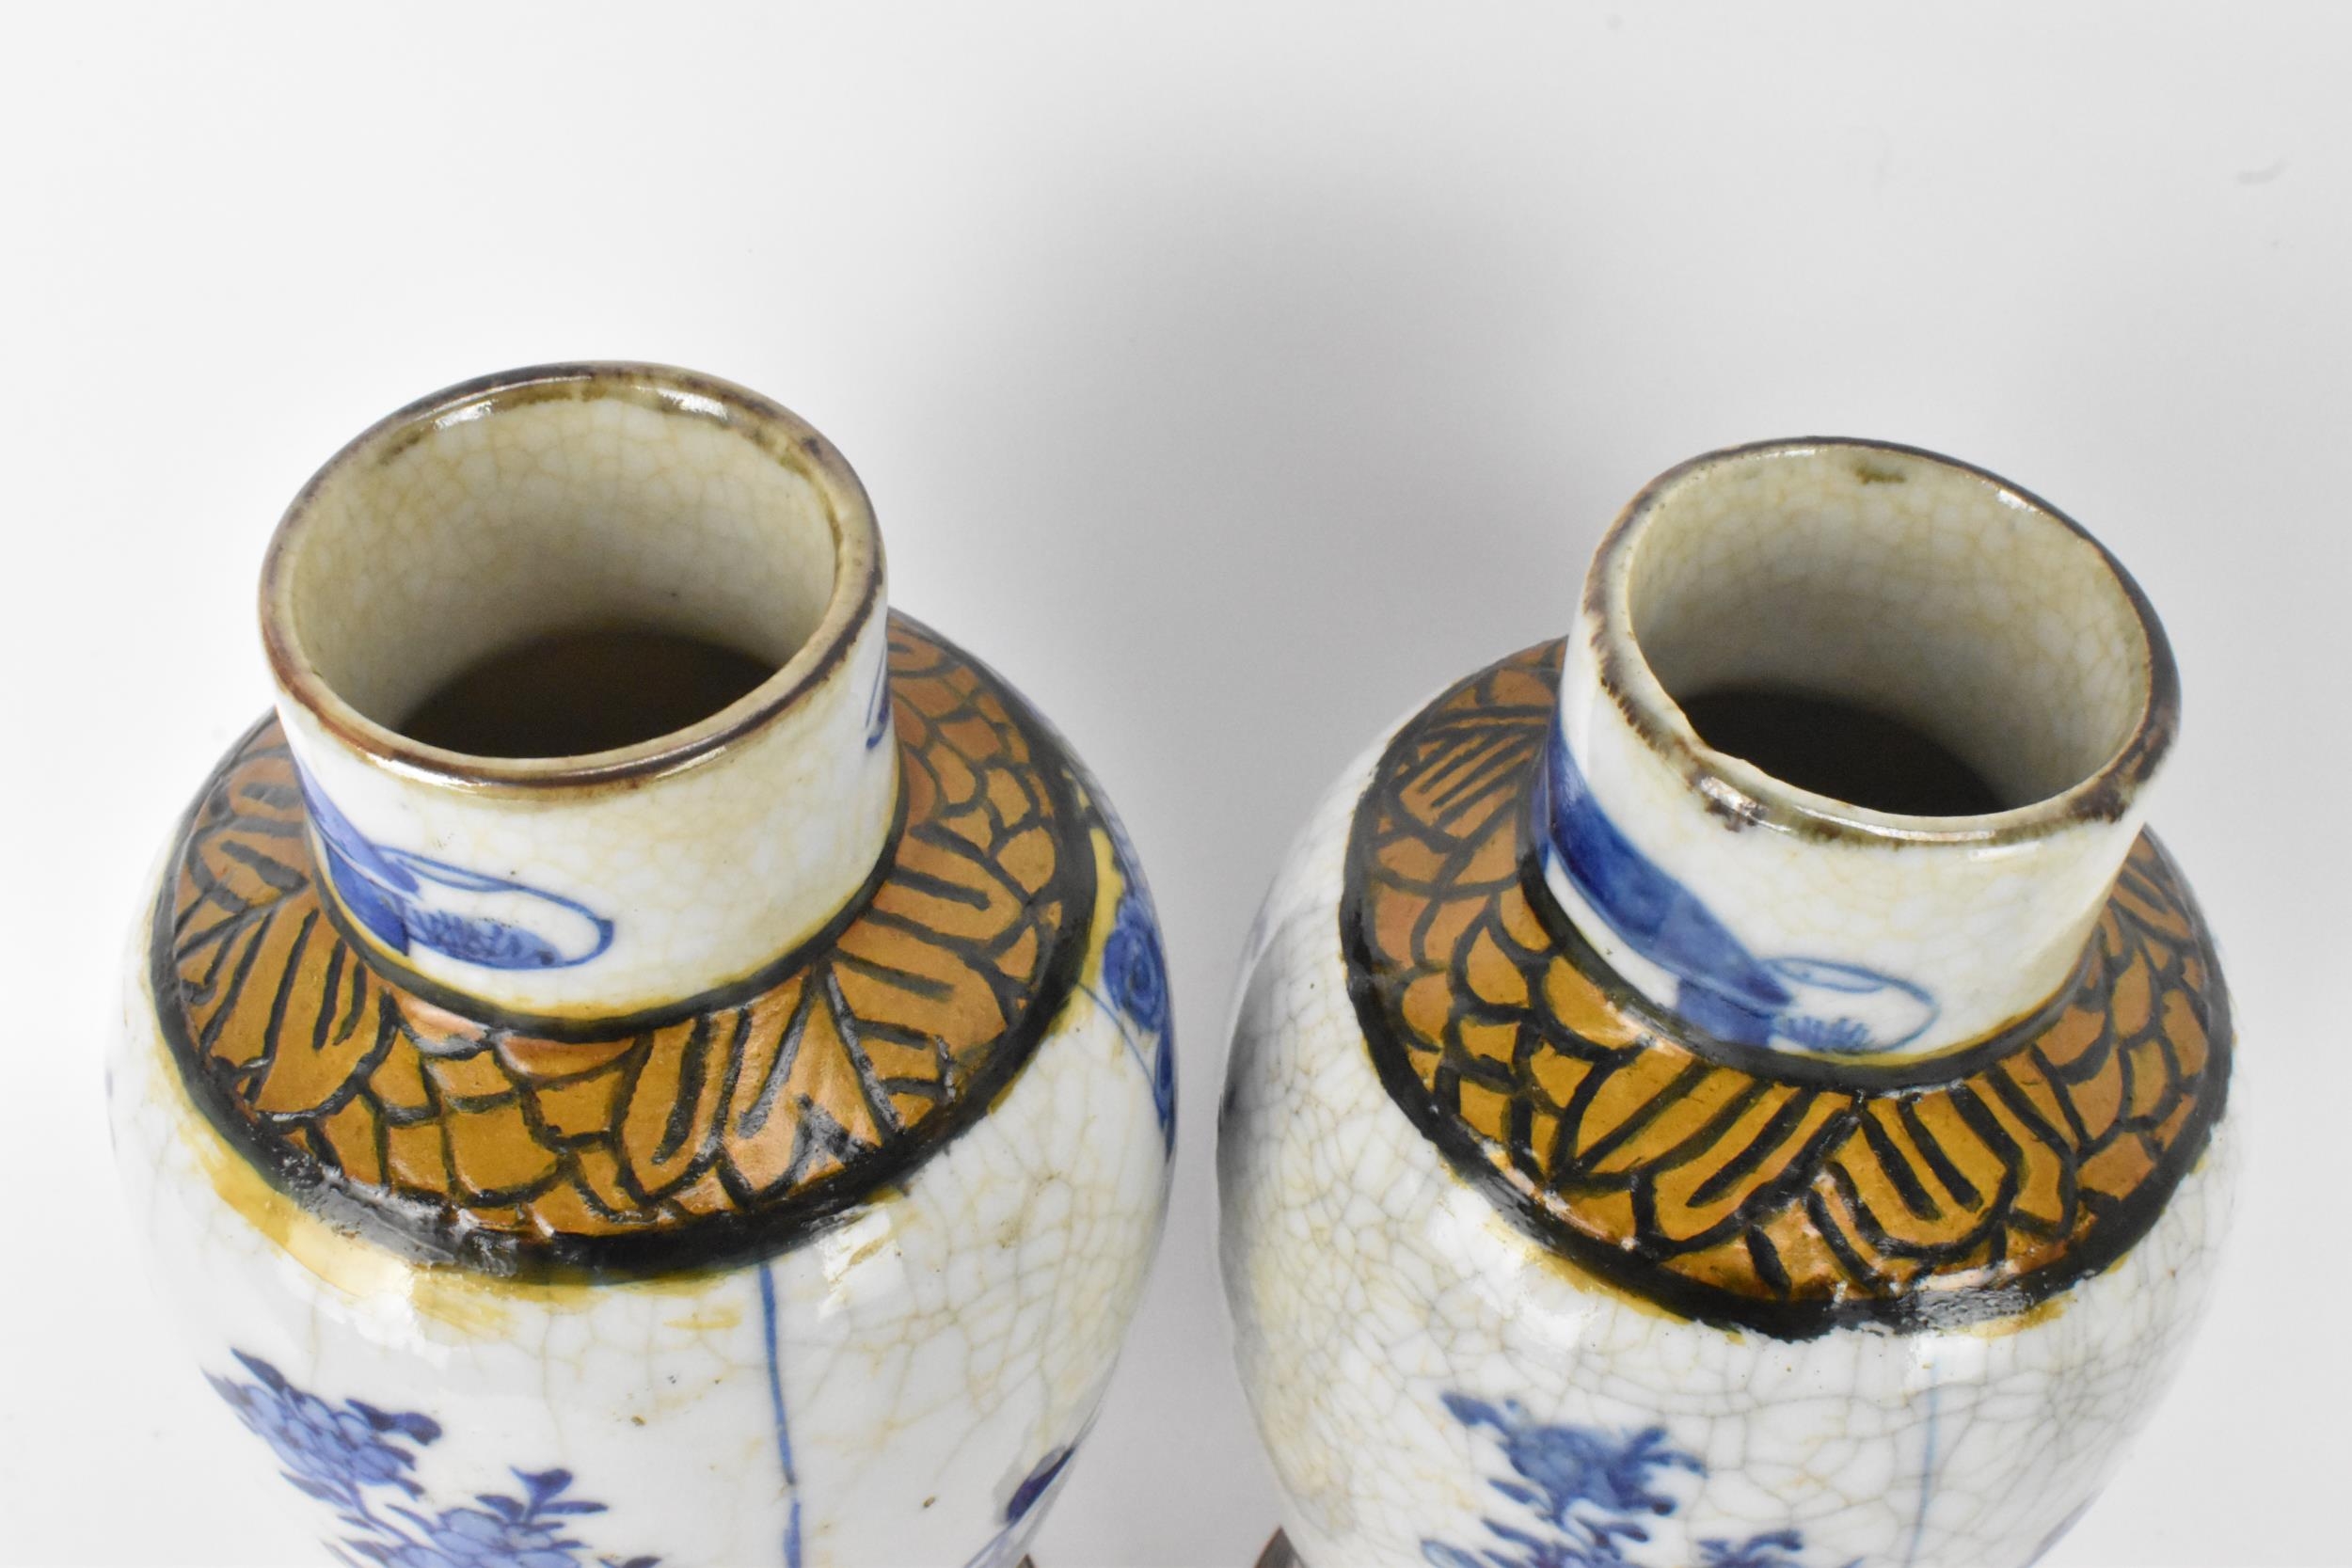 A pair of Chinese Nanking crackle glazed vases blue and white vases, Qing dynasty, 19th century, - Image 5 of 6